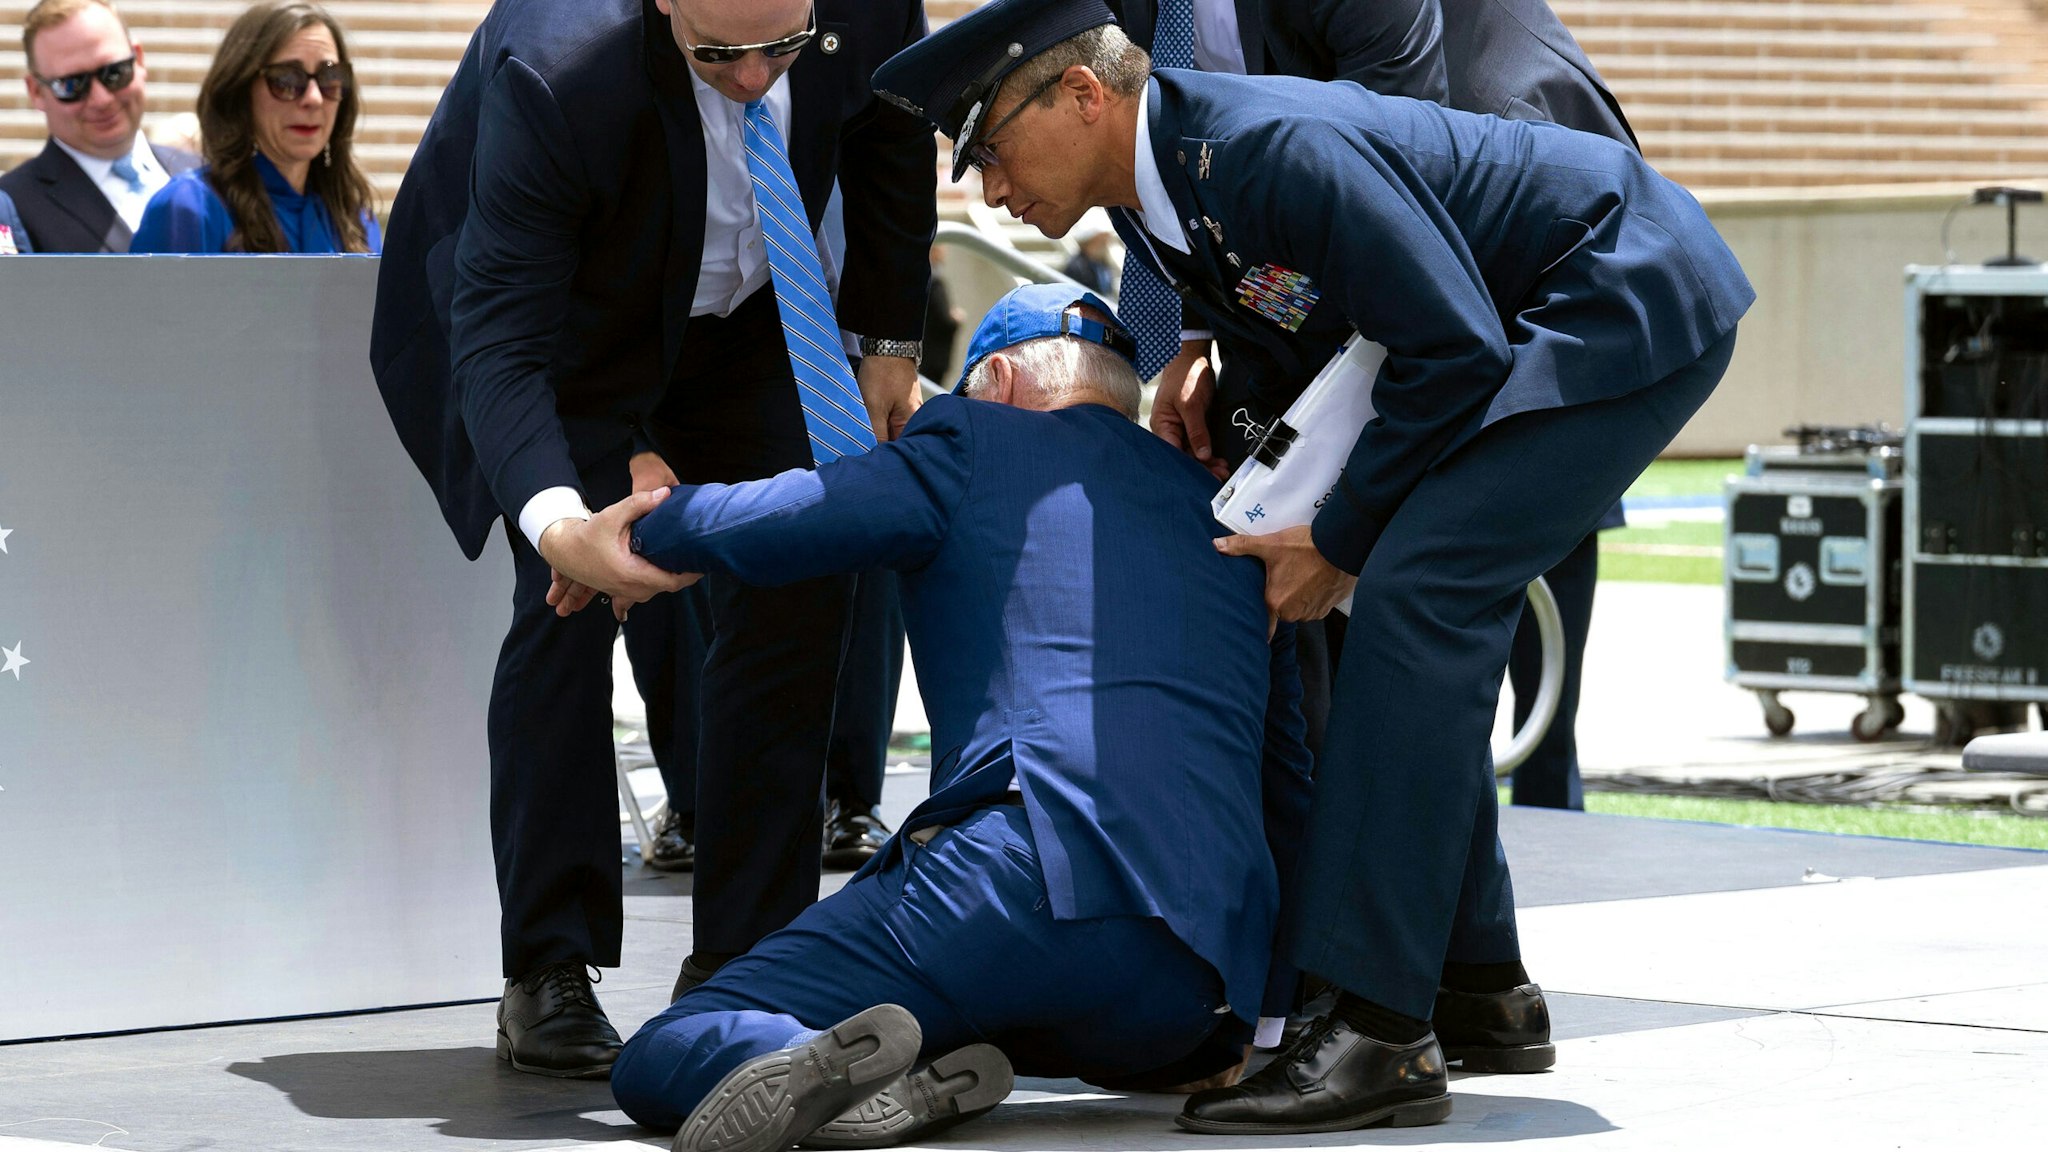 US President Joe Biden is helped up after falling during the graduation ceremony at the United States Air Force Academy, just north of Colorado Springs in El Paso County, Colorado, on June 1, 2023.